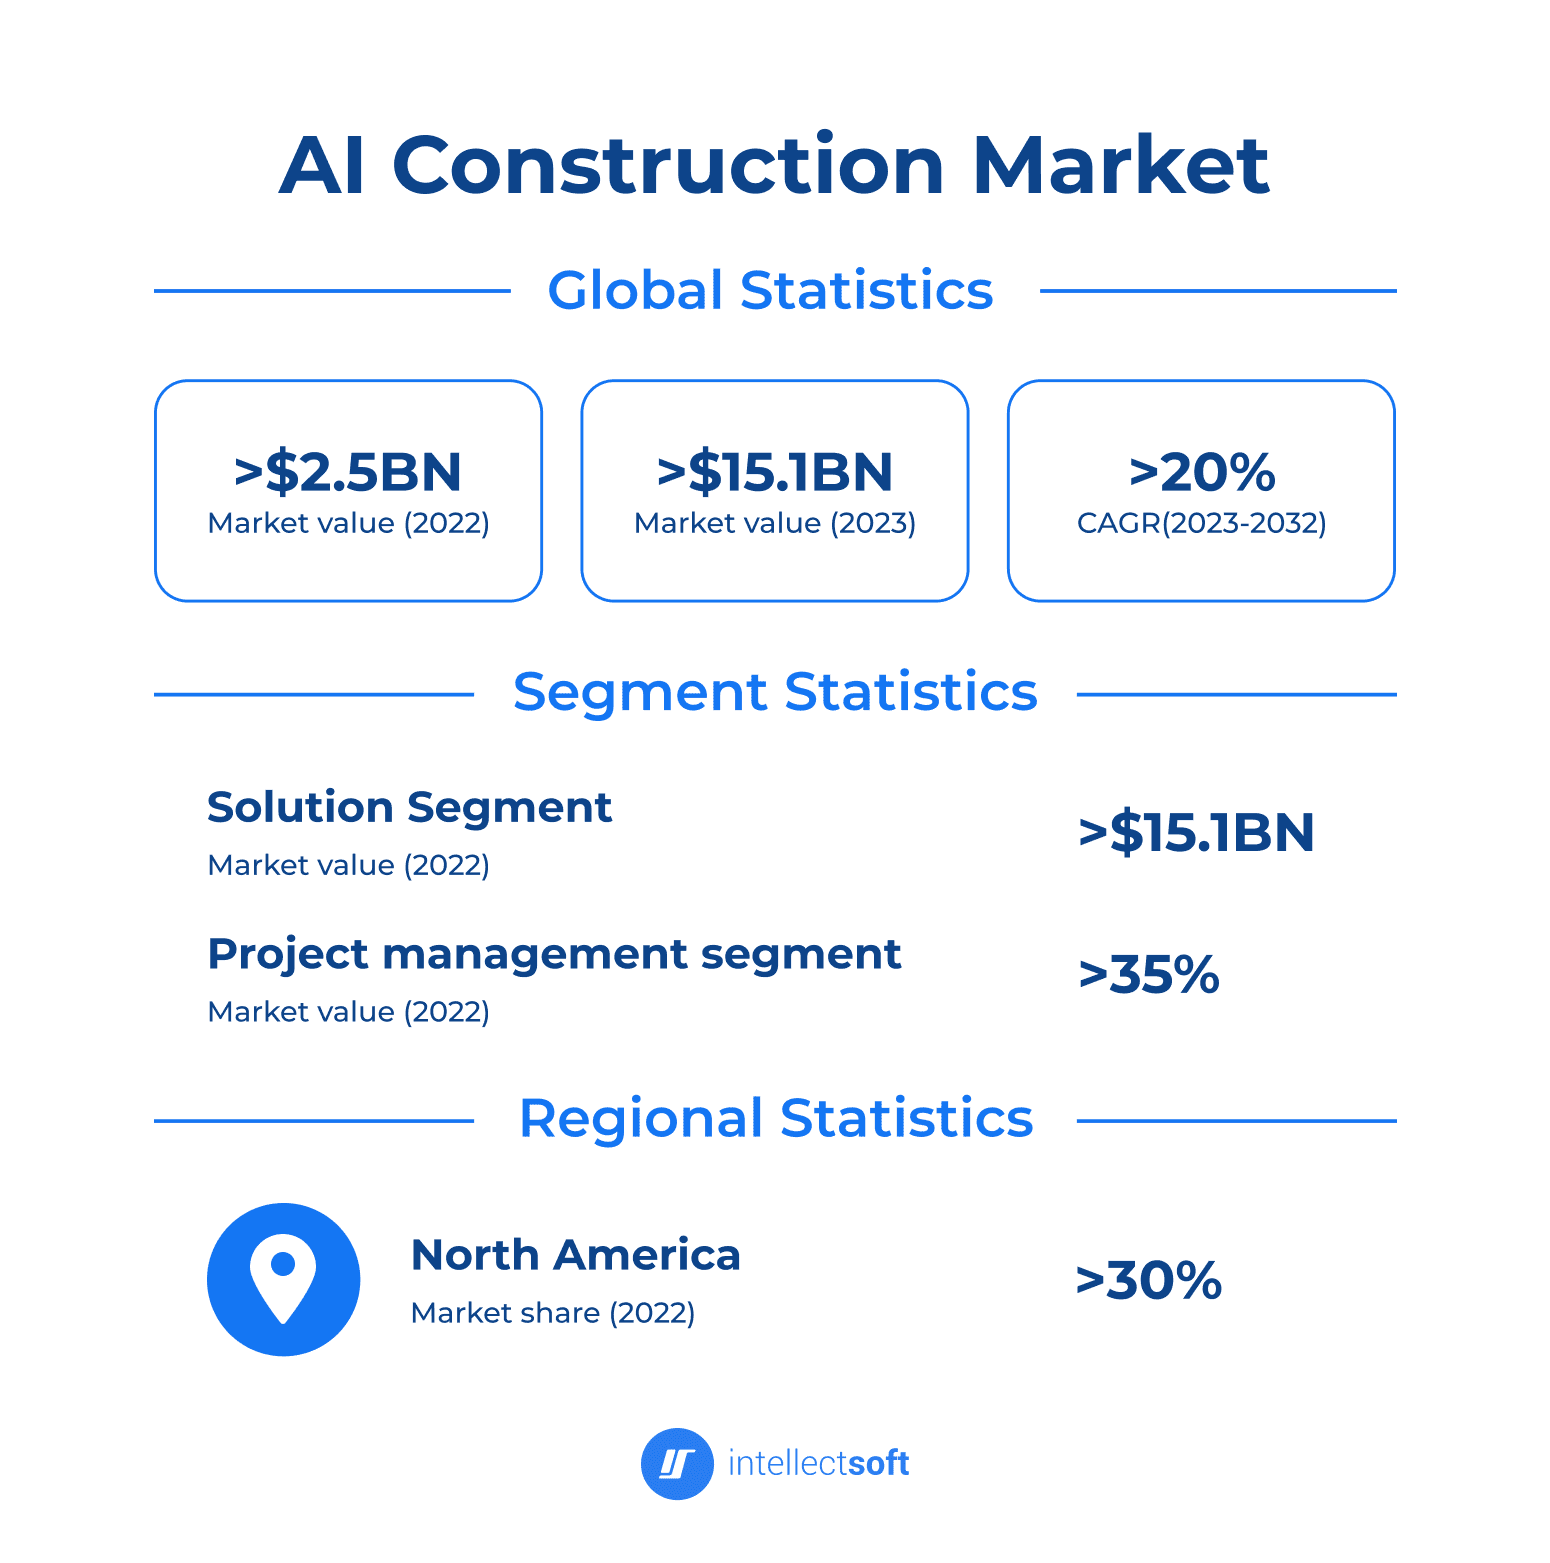 Infographic of the global AI construction market statistics